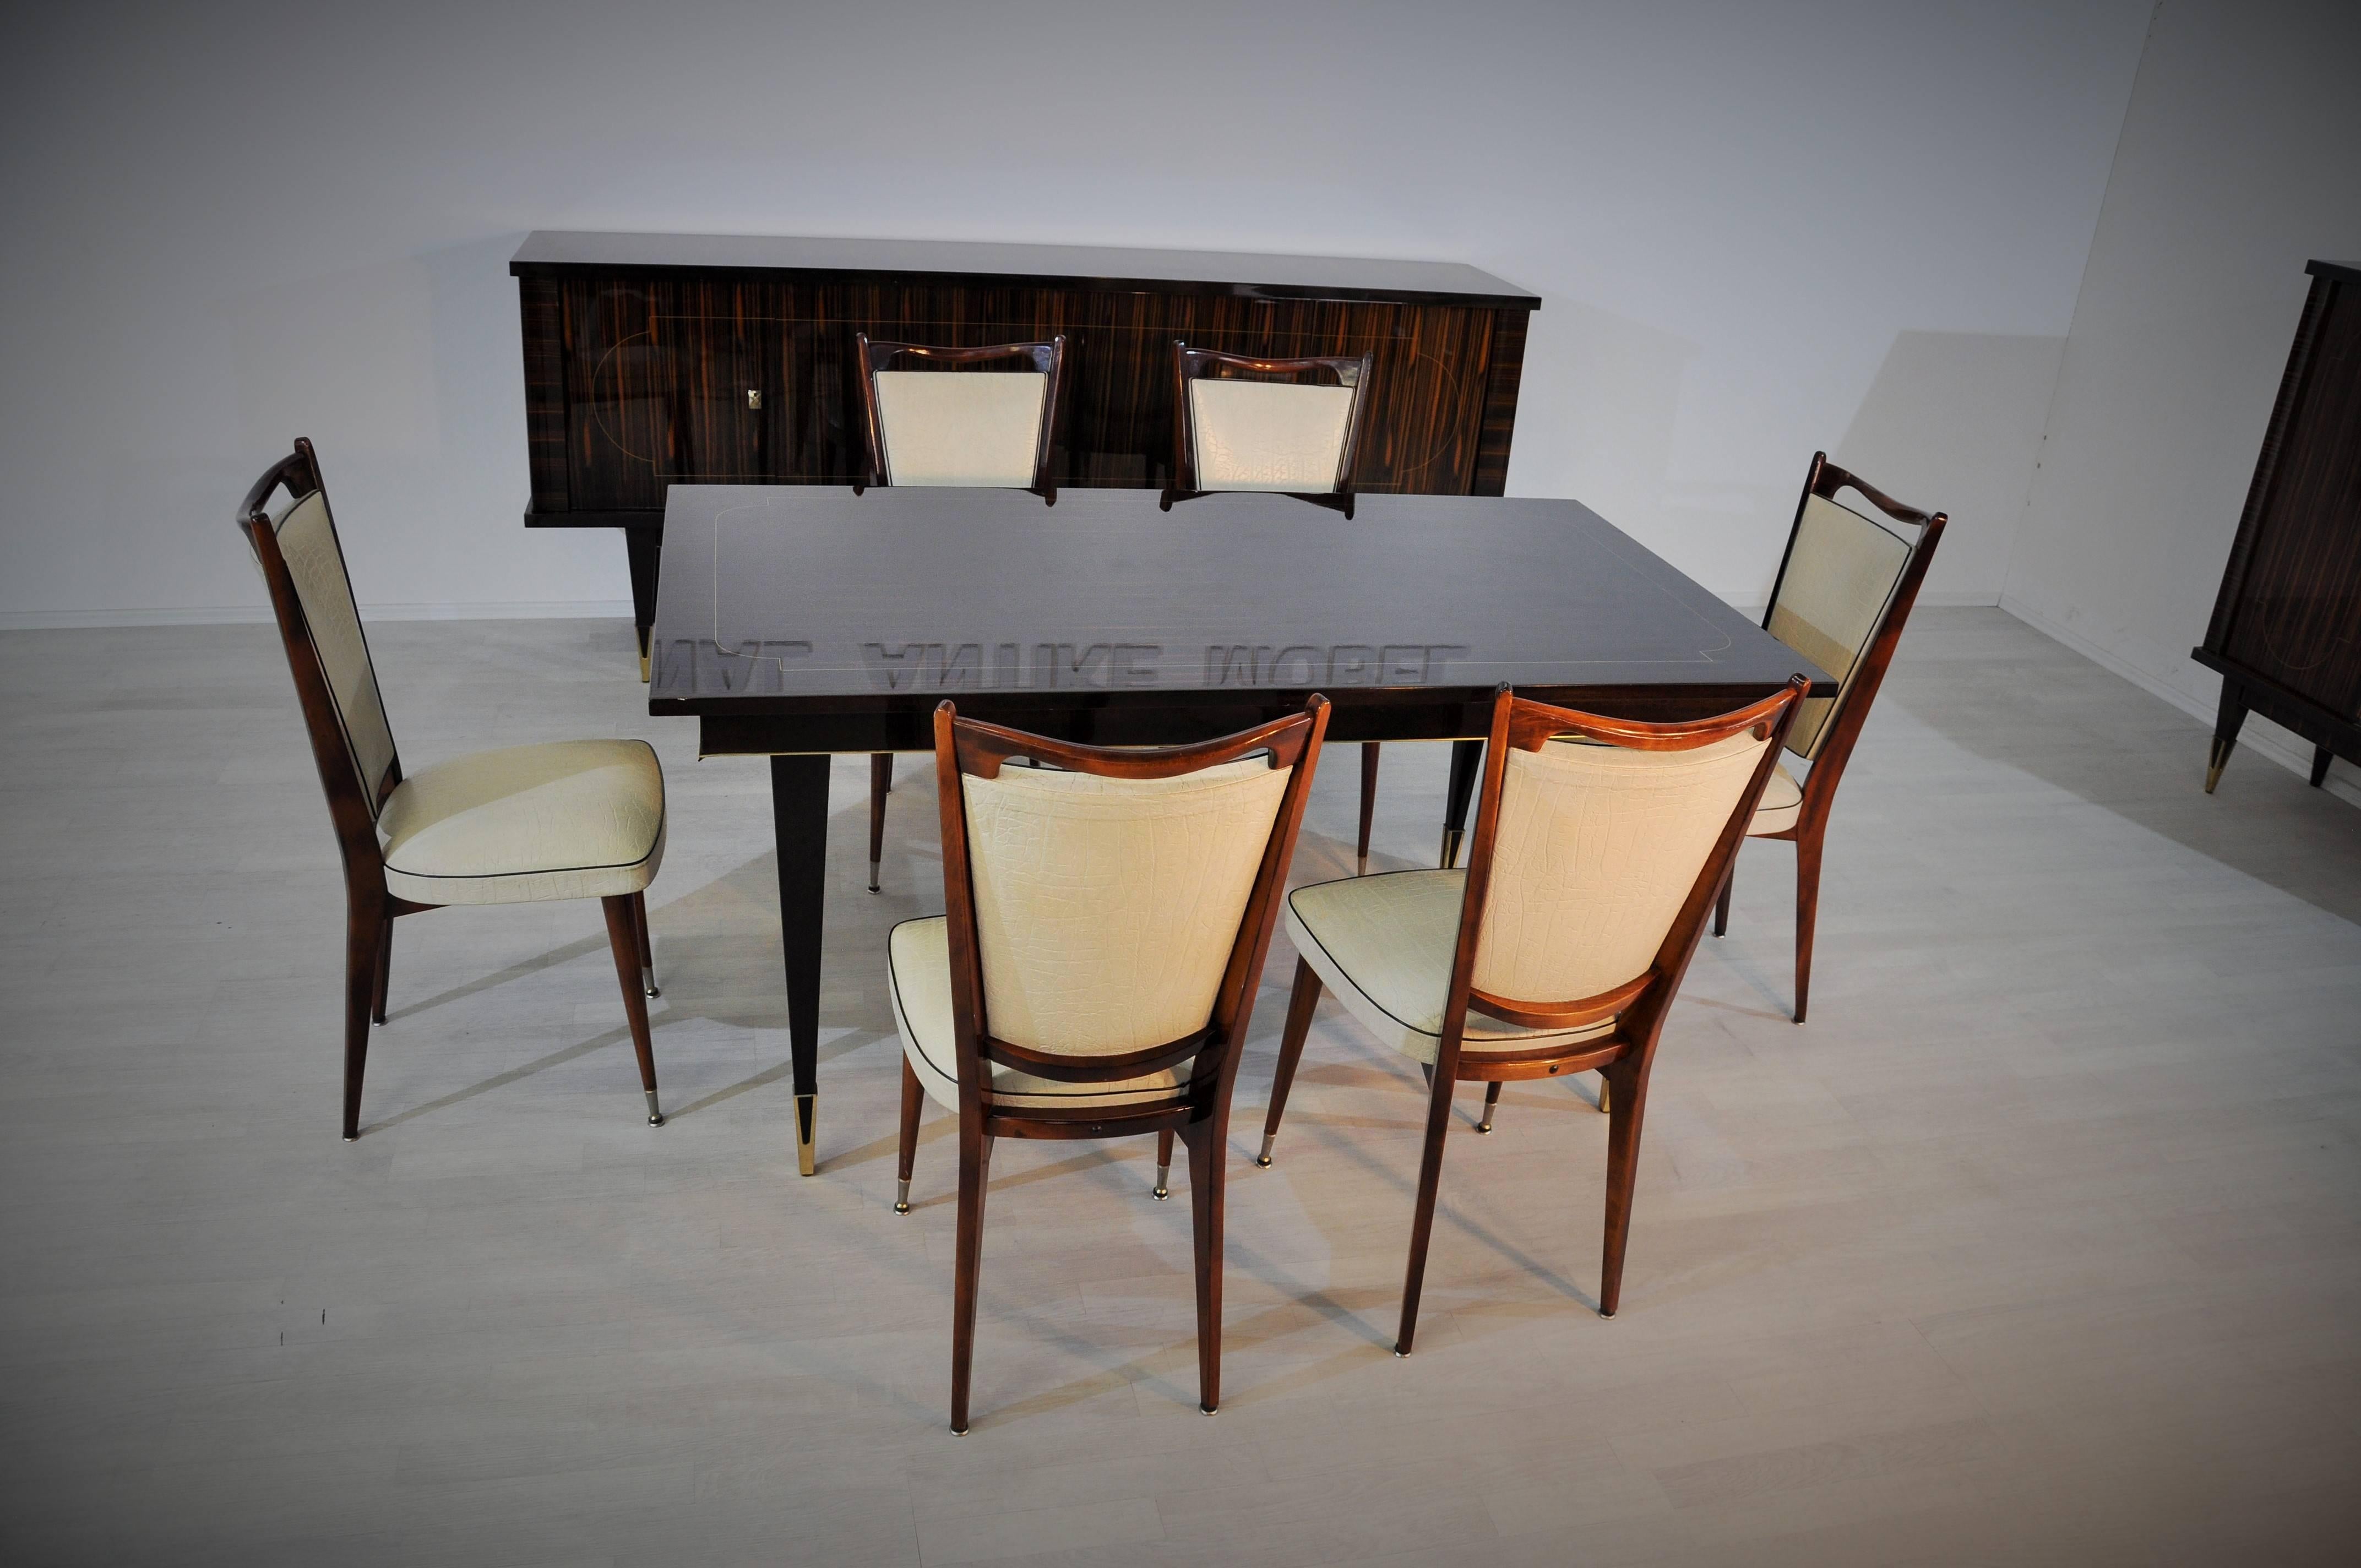 French Art Deco Macassar Dining Table with Brass Feets (Frühes 20. Jahrhundert)